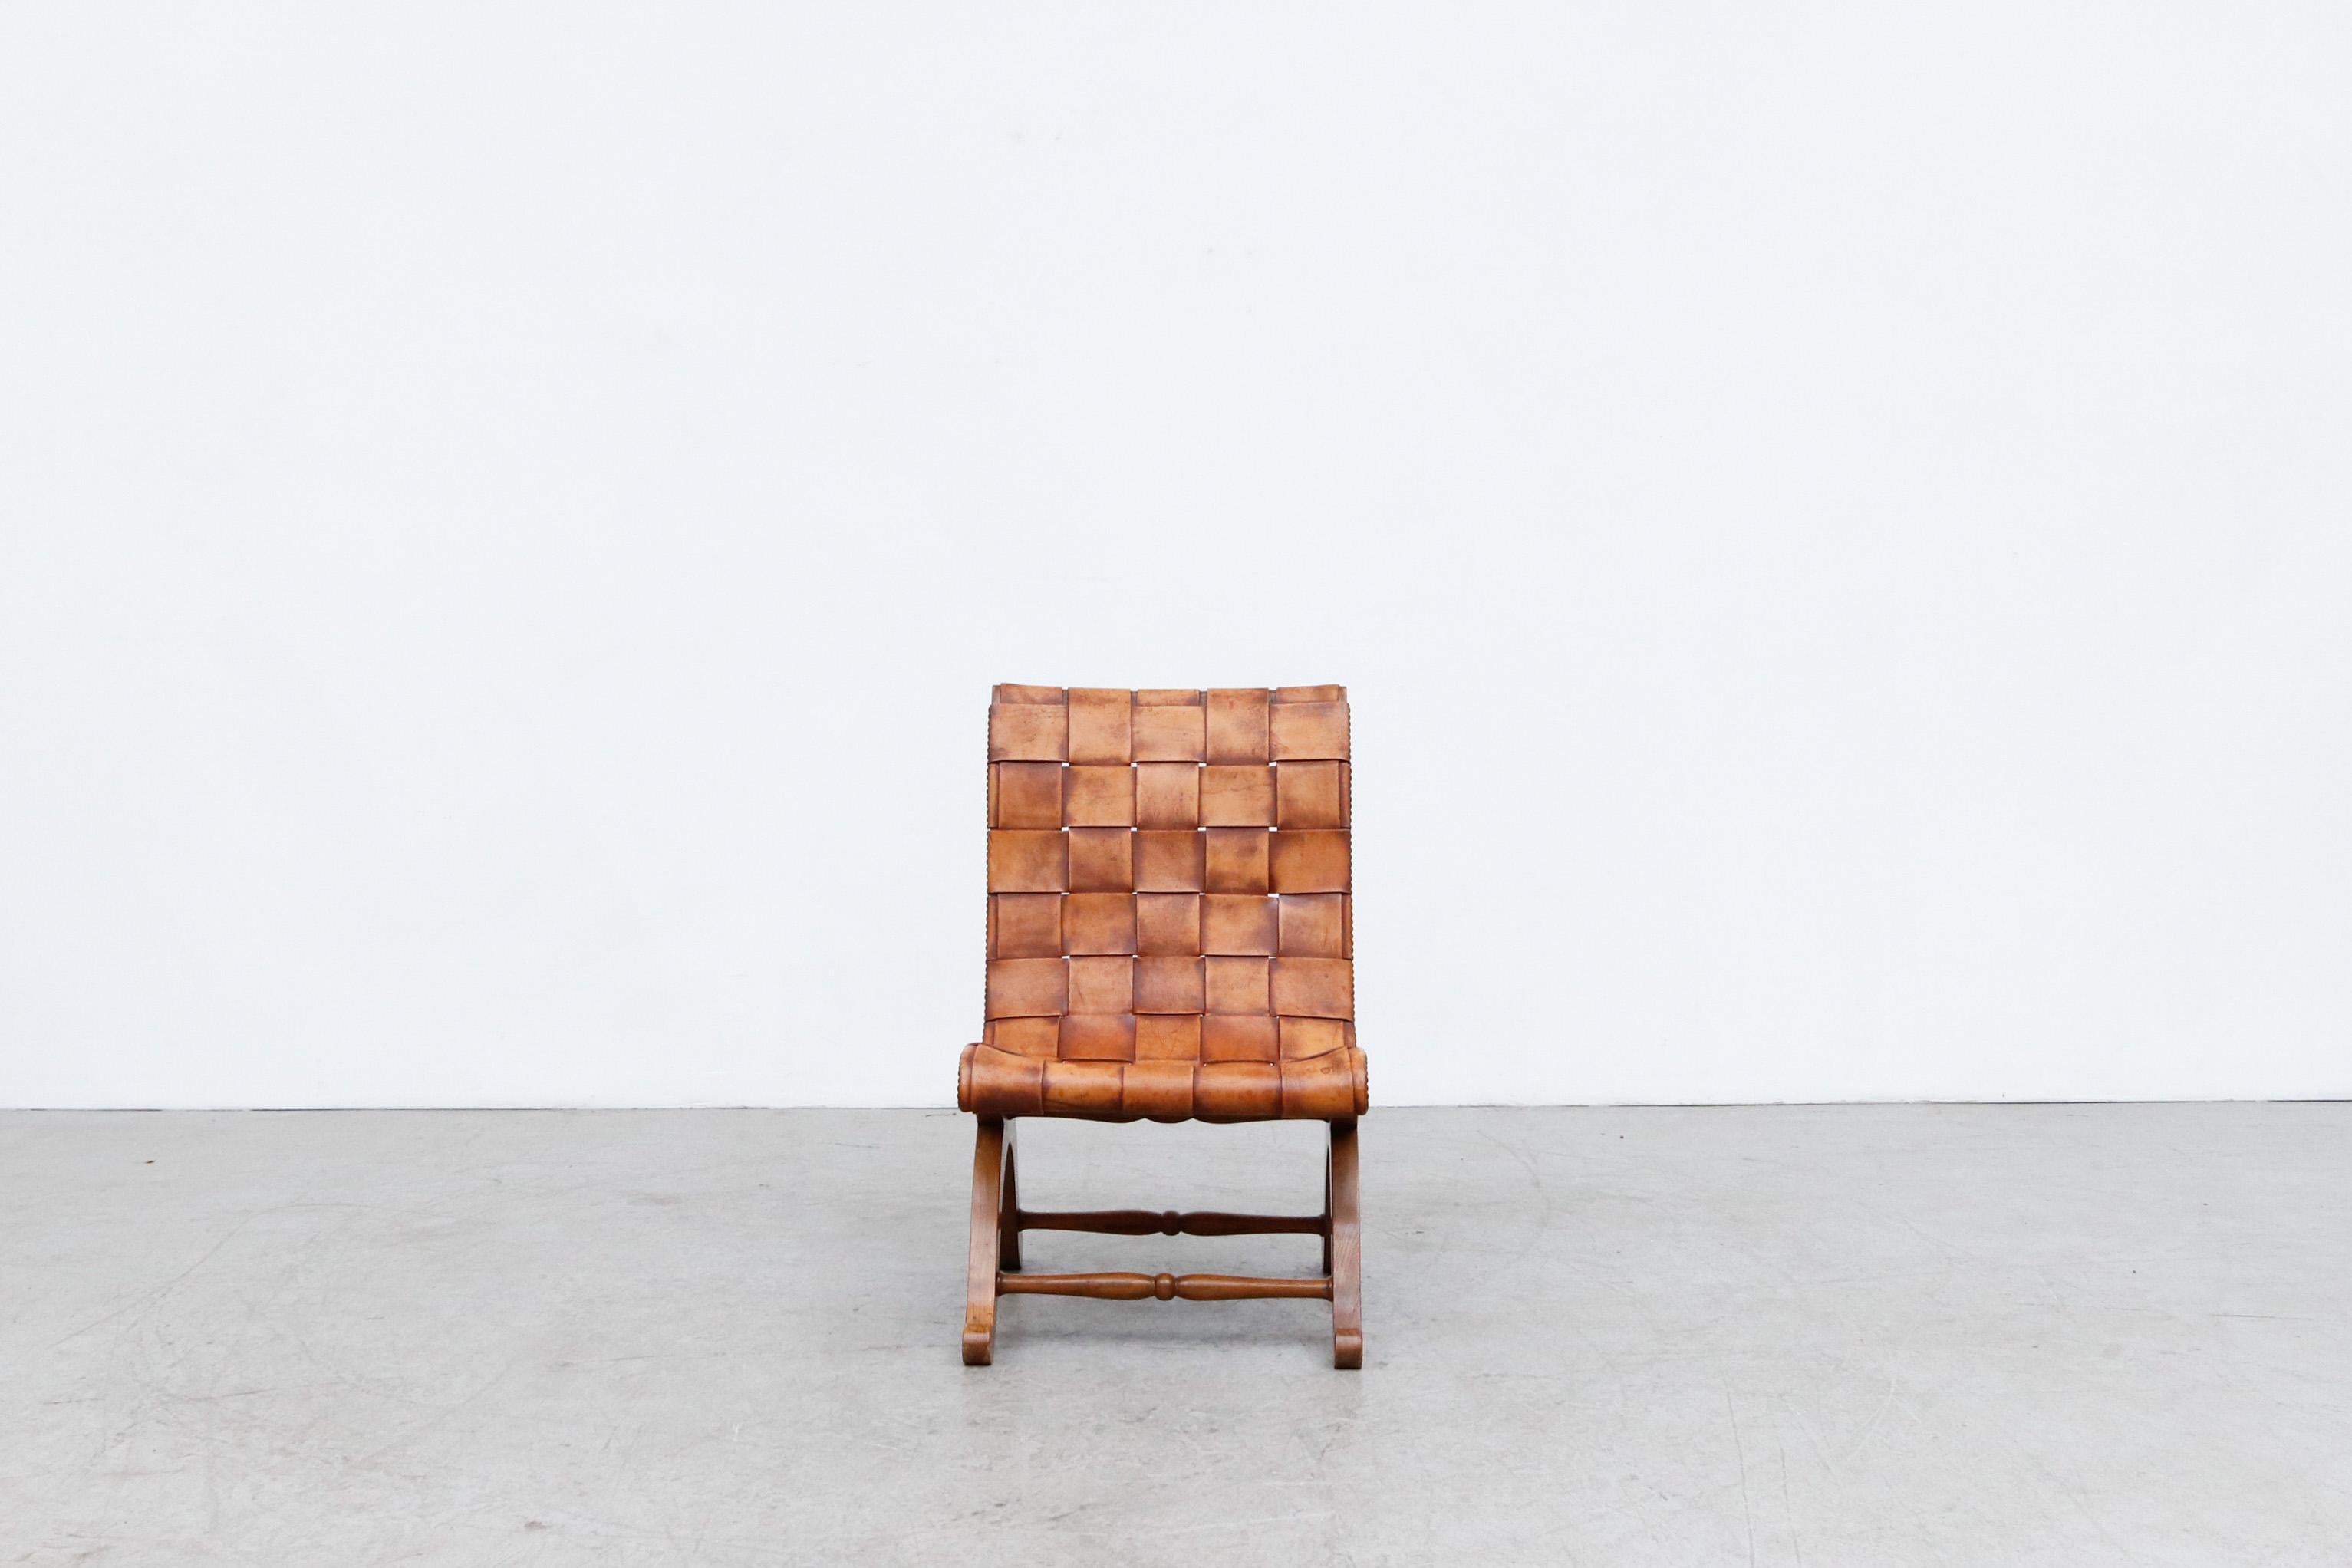 1950's Spanish woven leather side chair by Pierre Lottier. In good original condition with visible patina and wear consistent with age and use.